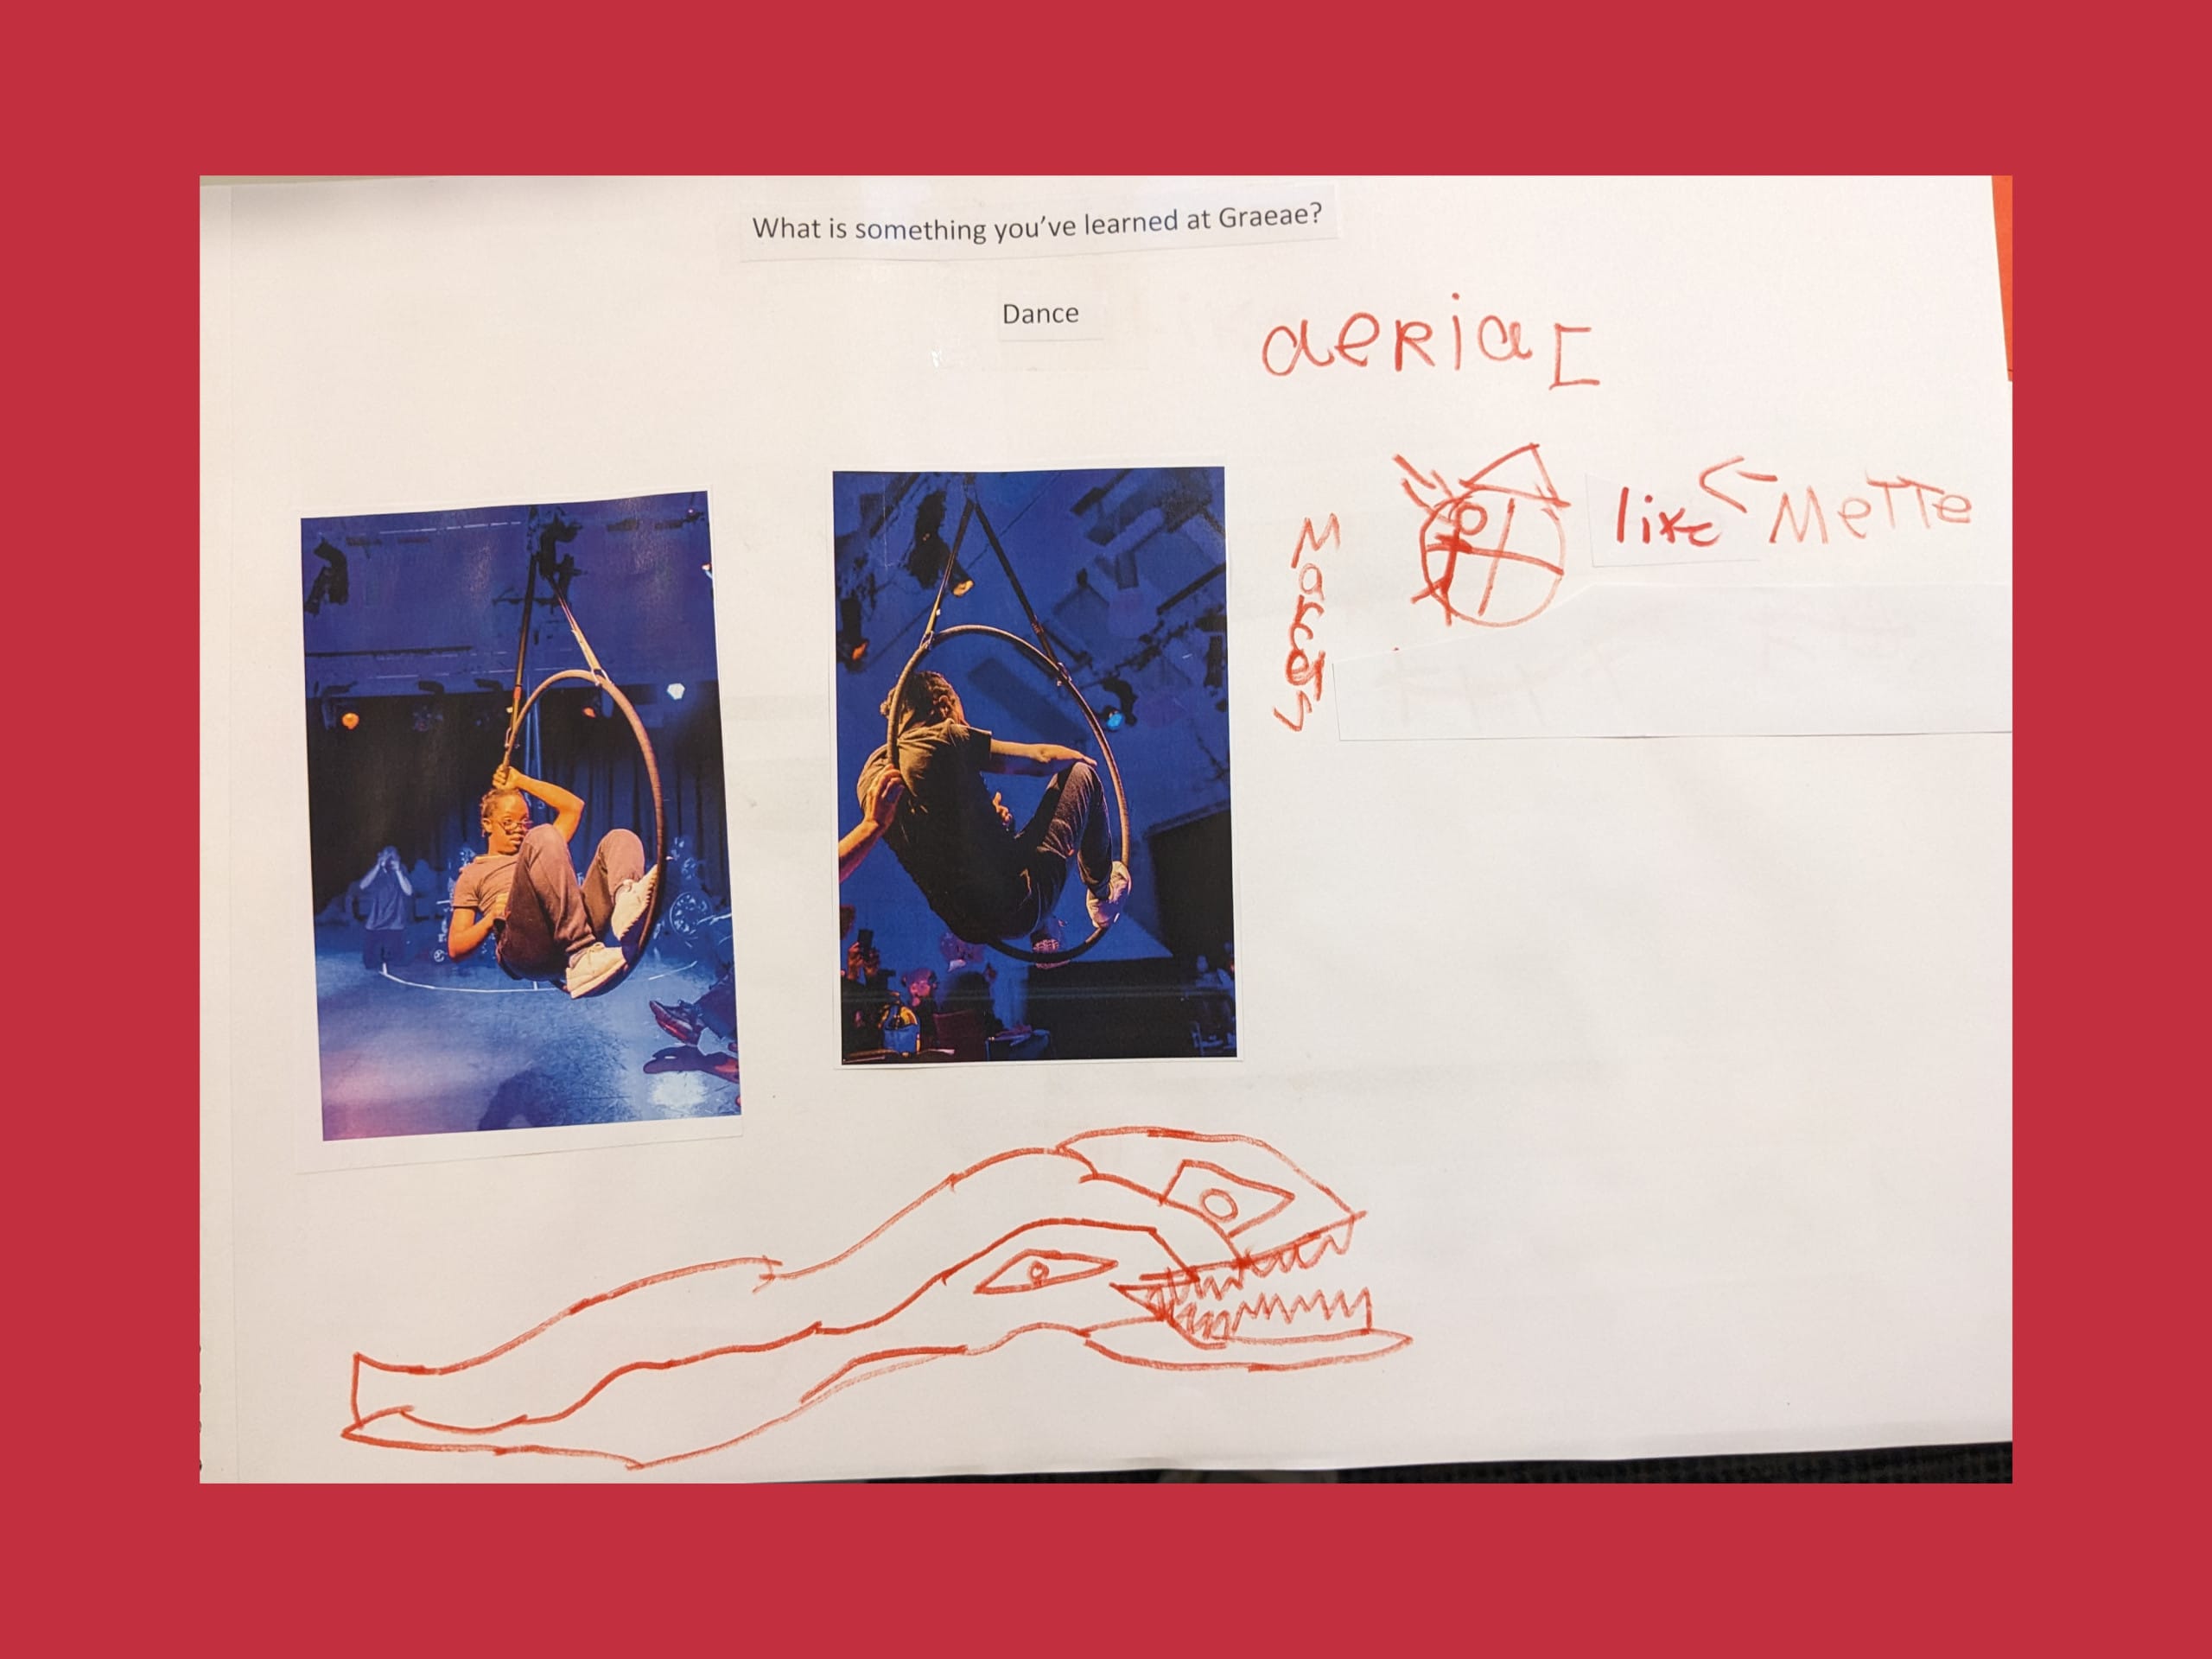 Two pictures of Marcus doing aerial work are shown. His is sitting in a circular aerial hoop. Marcus has drawn the same hoop next to it, he has written Marcus and like Mette on the image. At the bottom, he has also drawn two snakes.